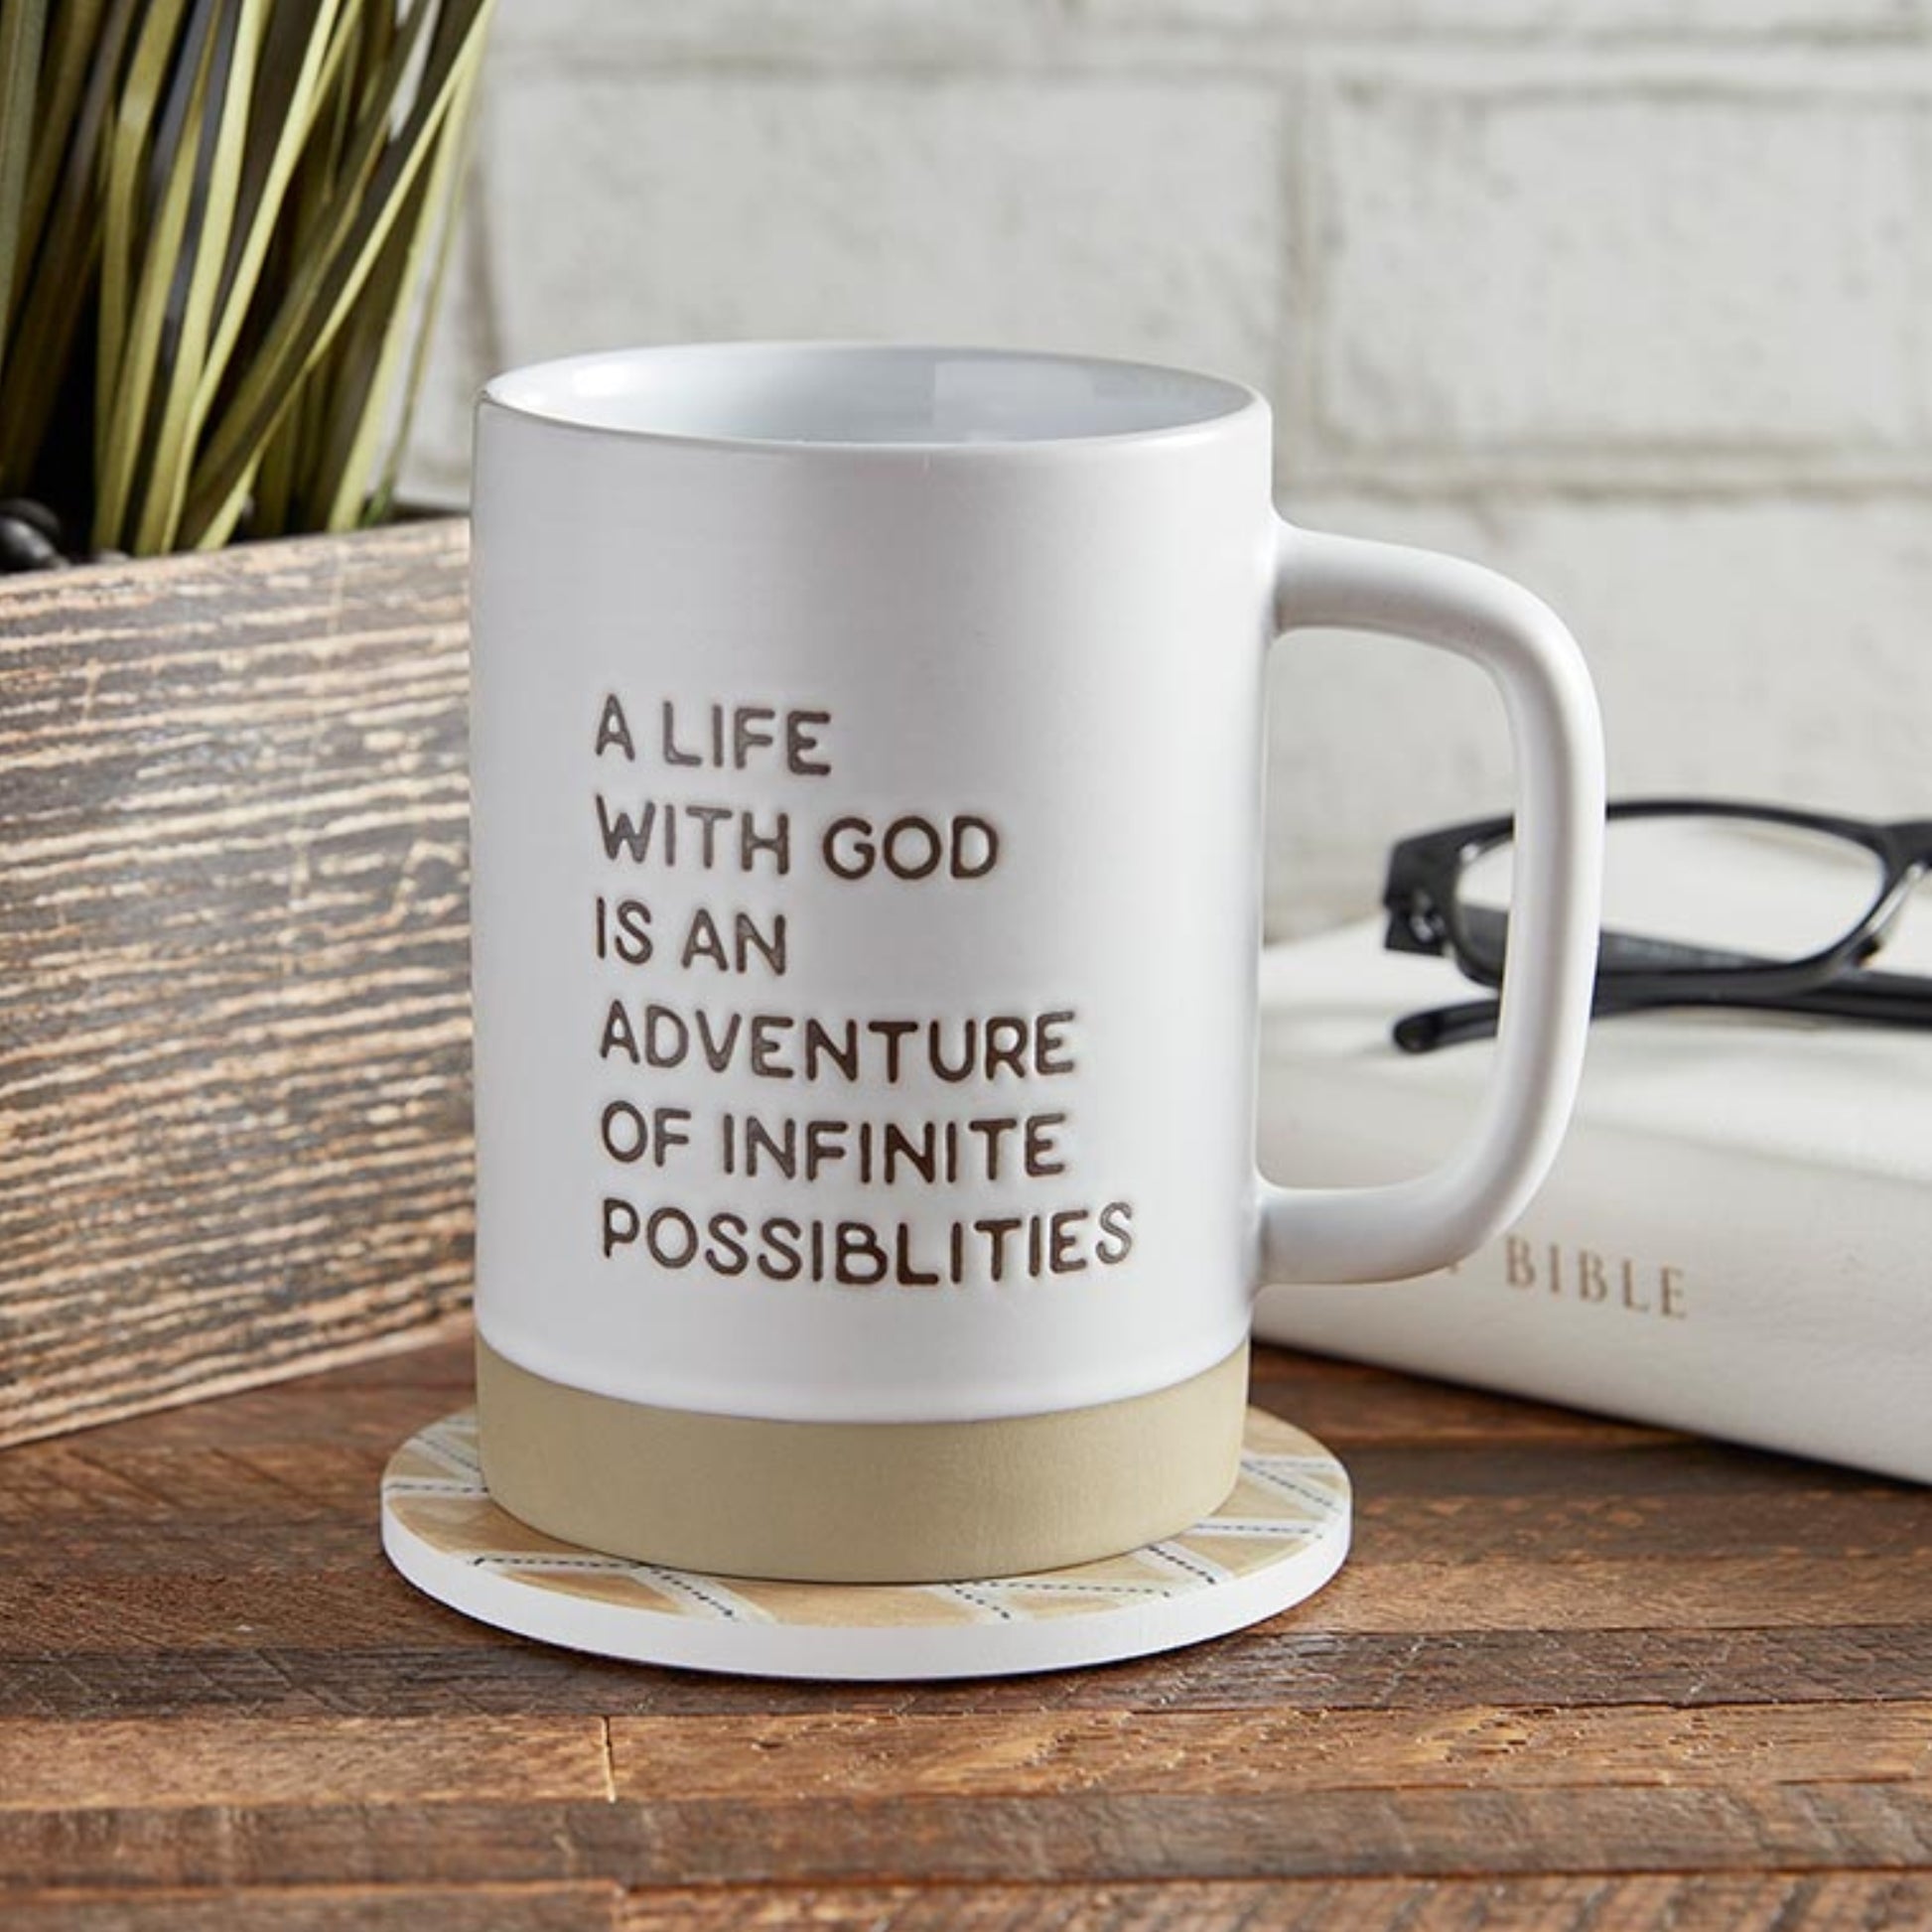 Inspirational Stoneware Coffee Mug - A life with God is an adventure of infinite possibilities shown with Bible | oak7west.com